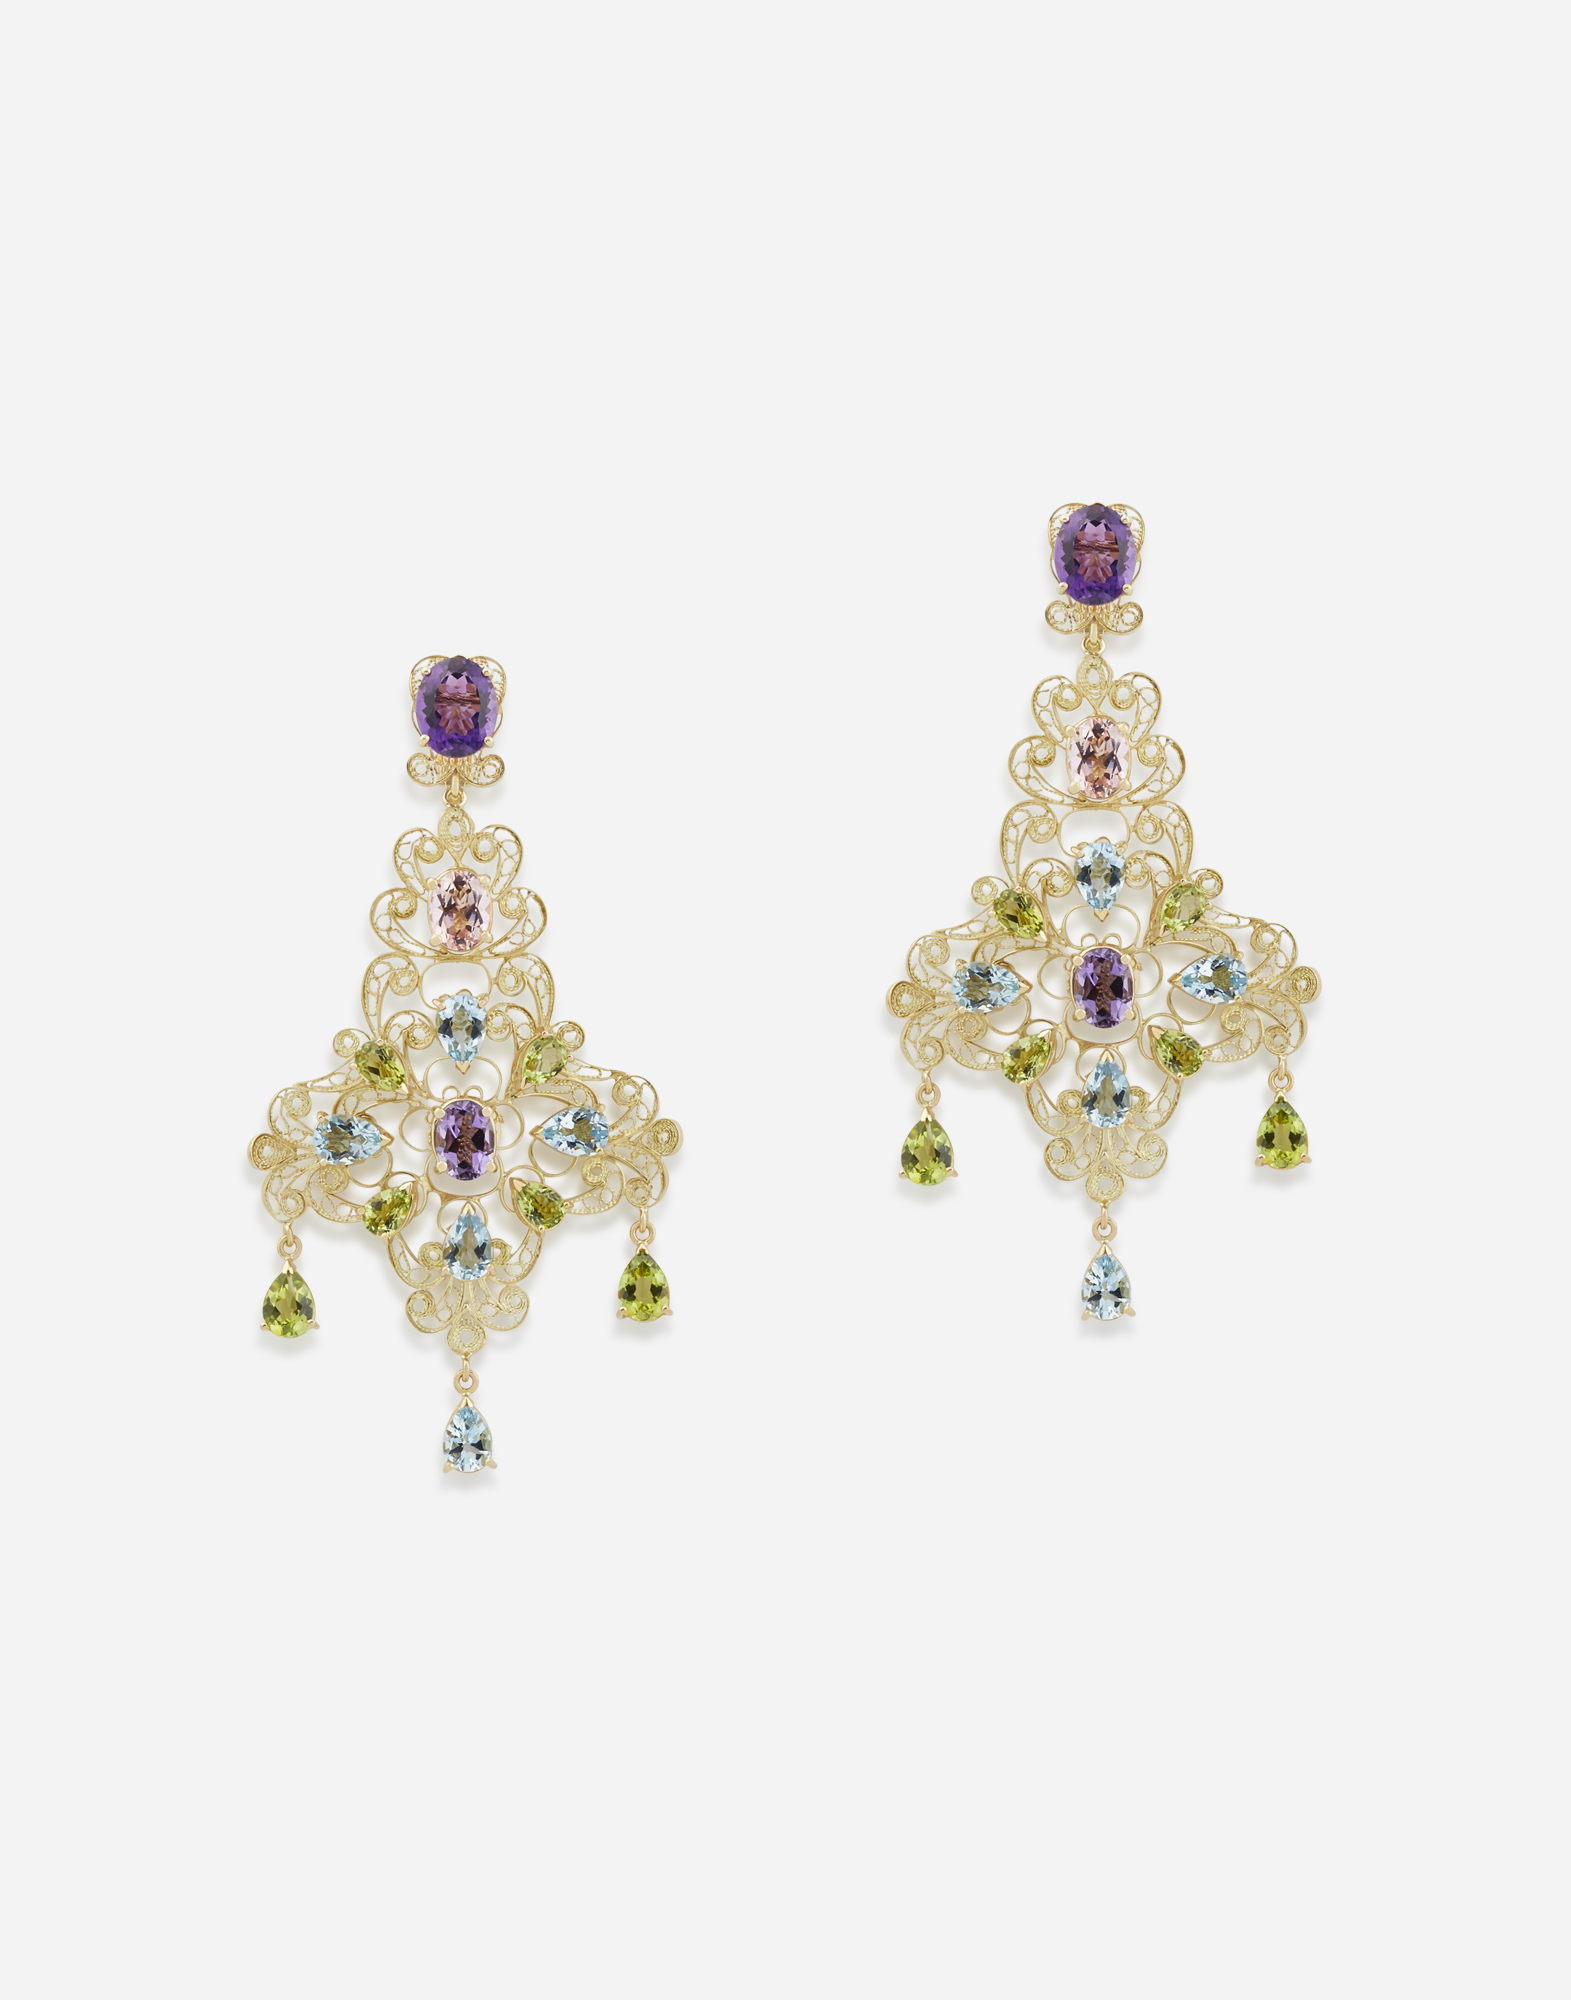 Pizzo earrings in yellow gold filigree with amethysts, aquamarines, peridots and morganites in Gold